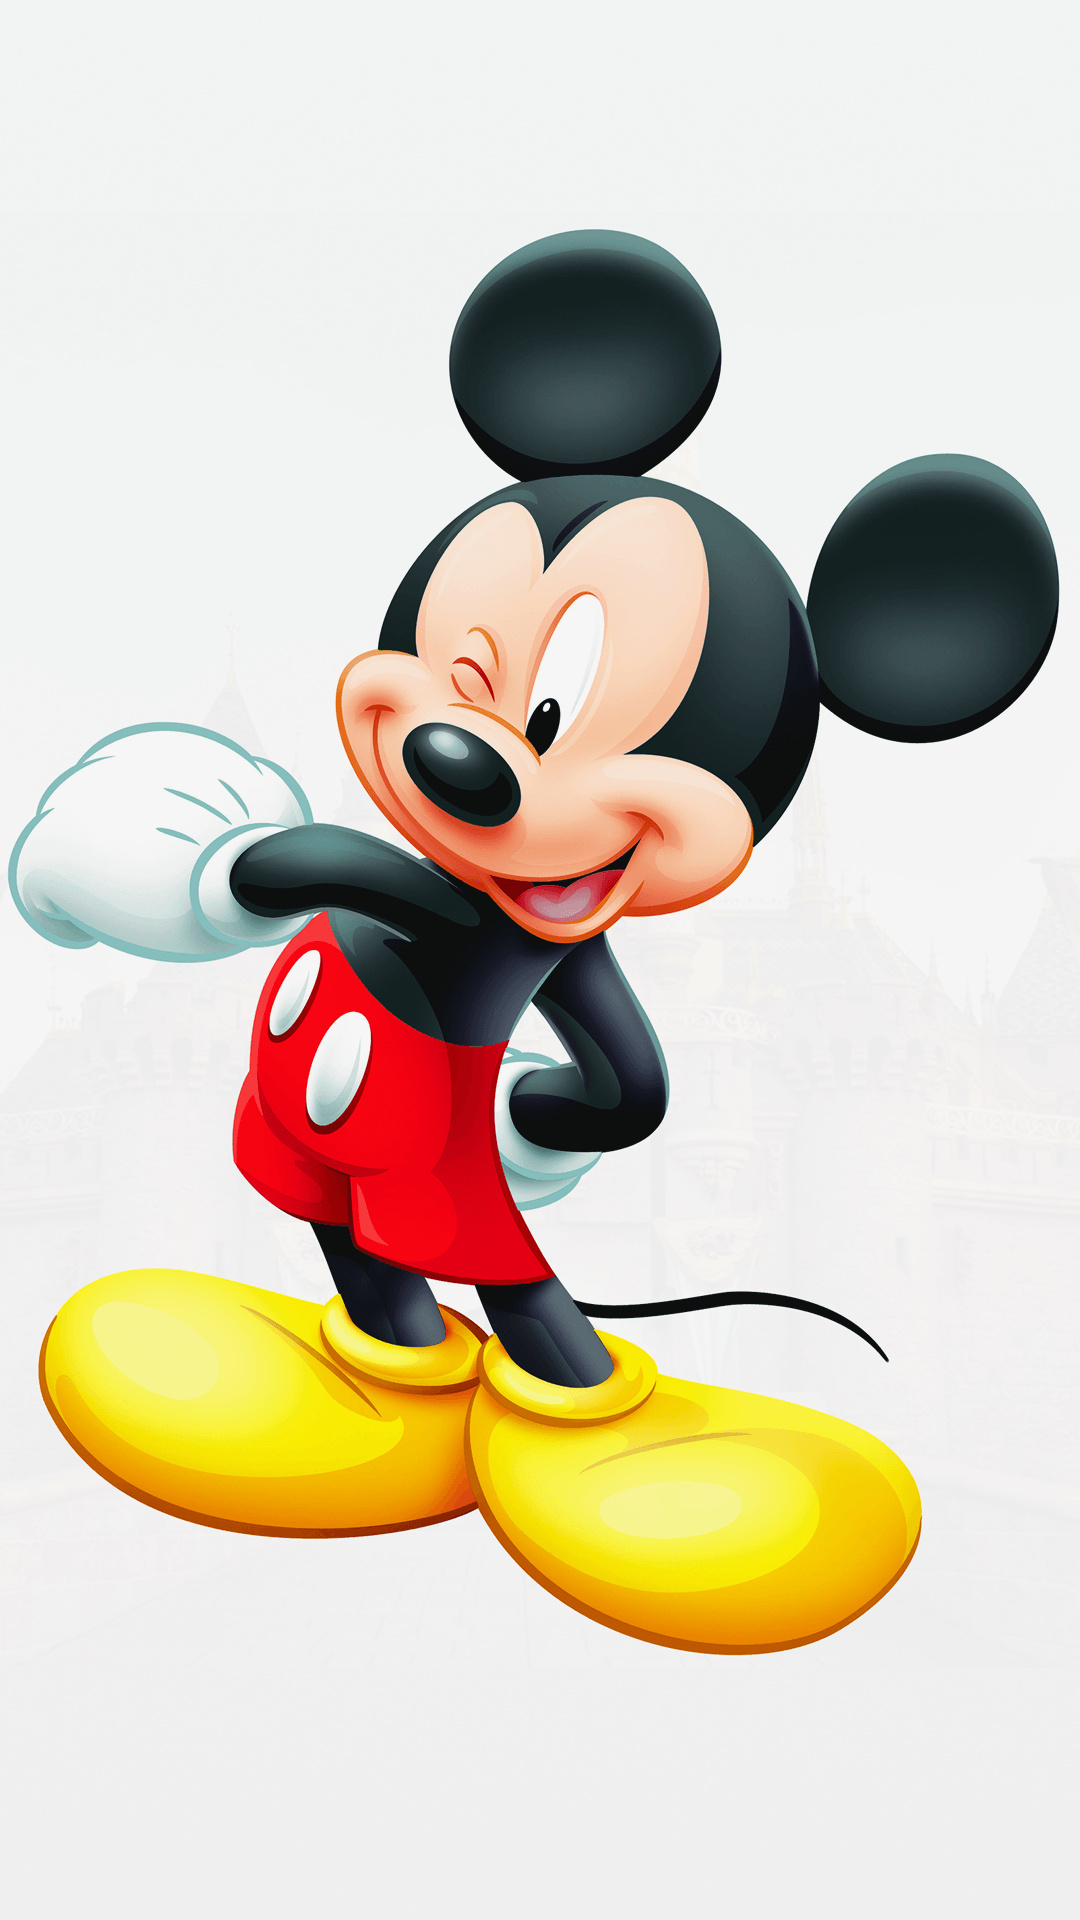 Mickey Mouse wallpaper for home screen, Striking visuals, Disney's beloved character, 1080x1920 Full HD Phone